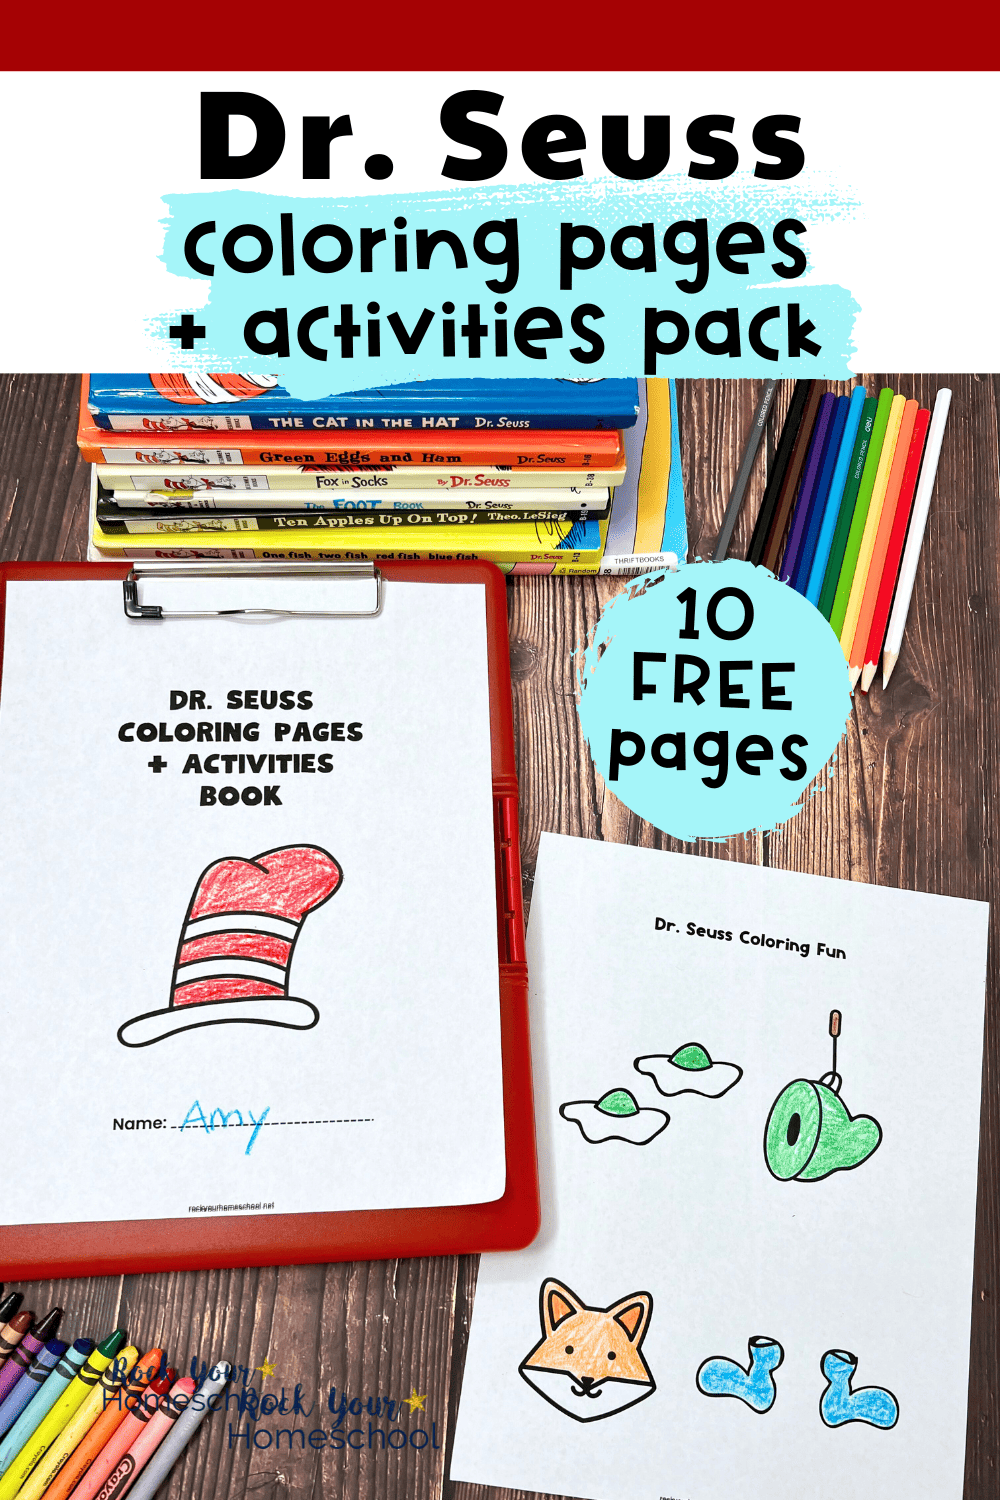 Dr. Seuss coloring pages and activities pack cover with example of coloring page with Green Eggs and Ham and Fox in Socks with crayons, color pencils, and Dr. Seuss books.